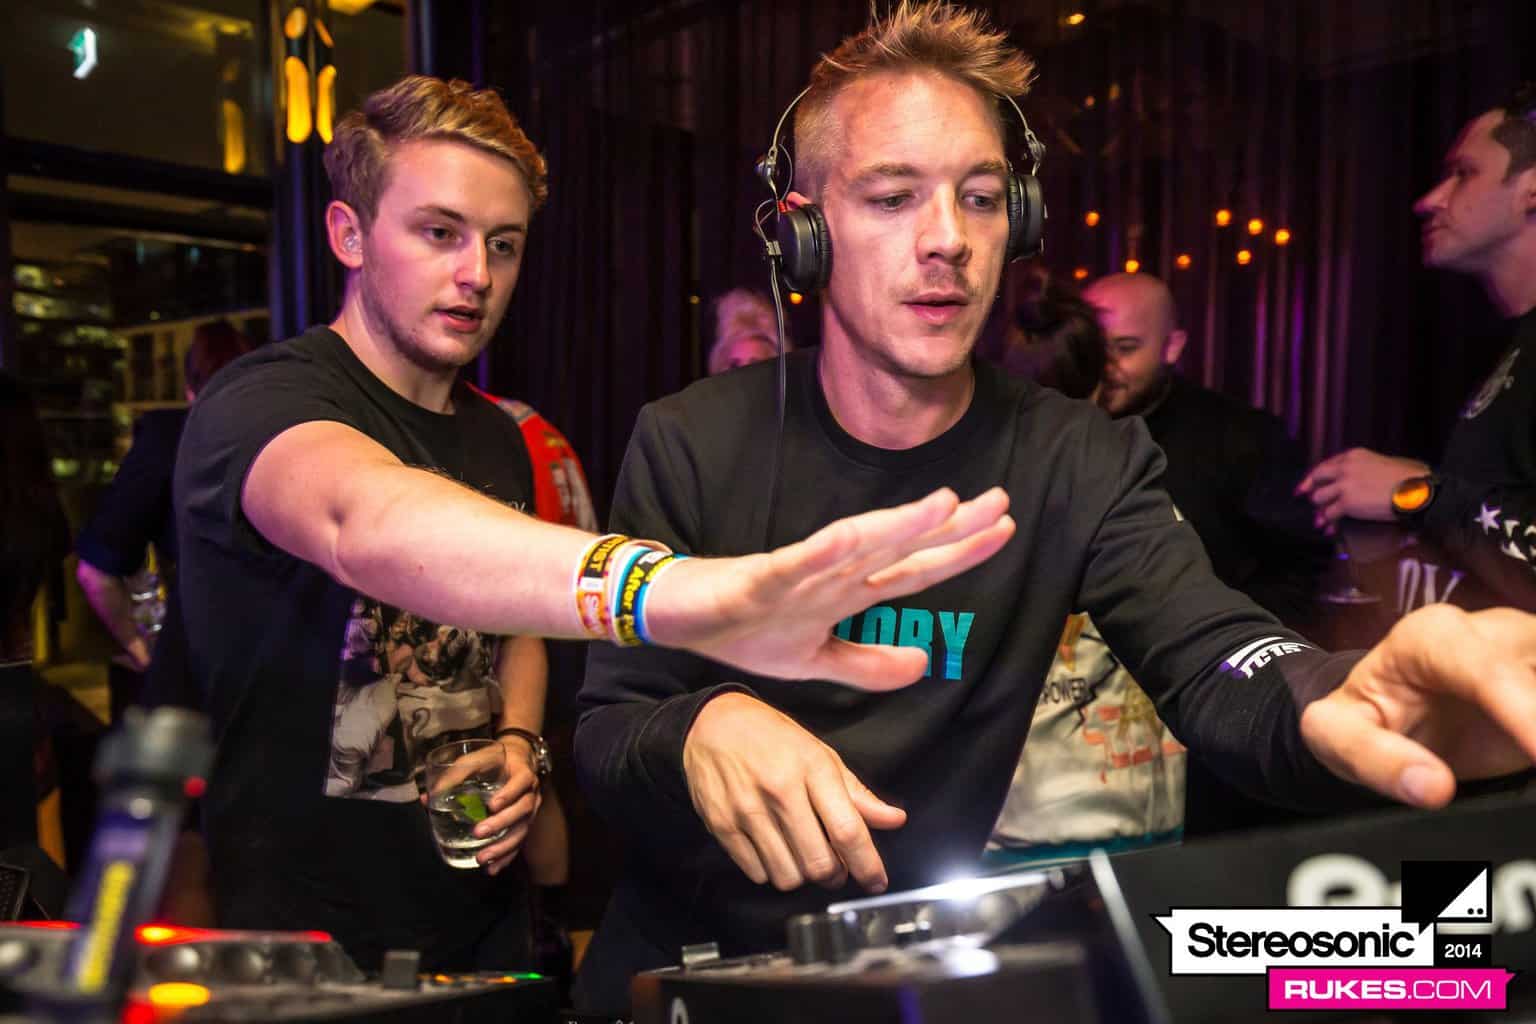 Diplo Tosses Girl's Phone Into Crowd After Trying To Take a Selfie